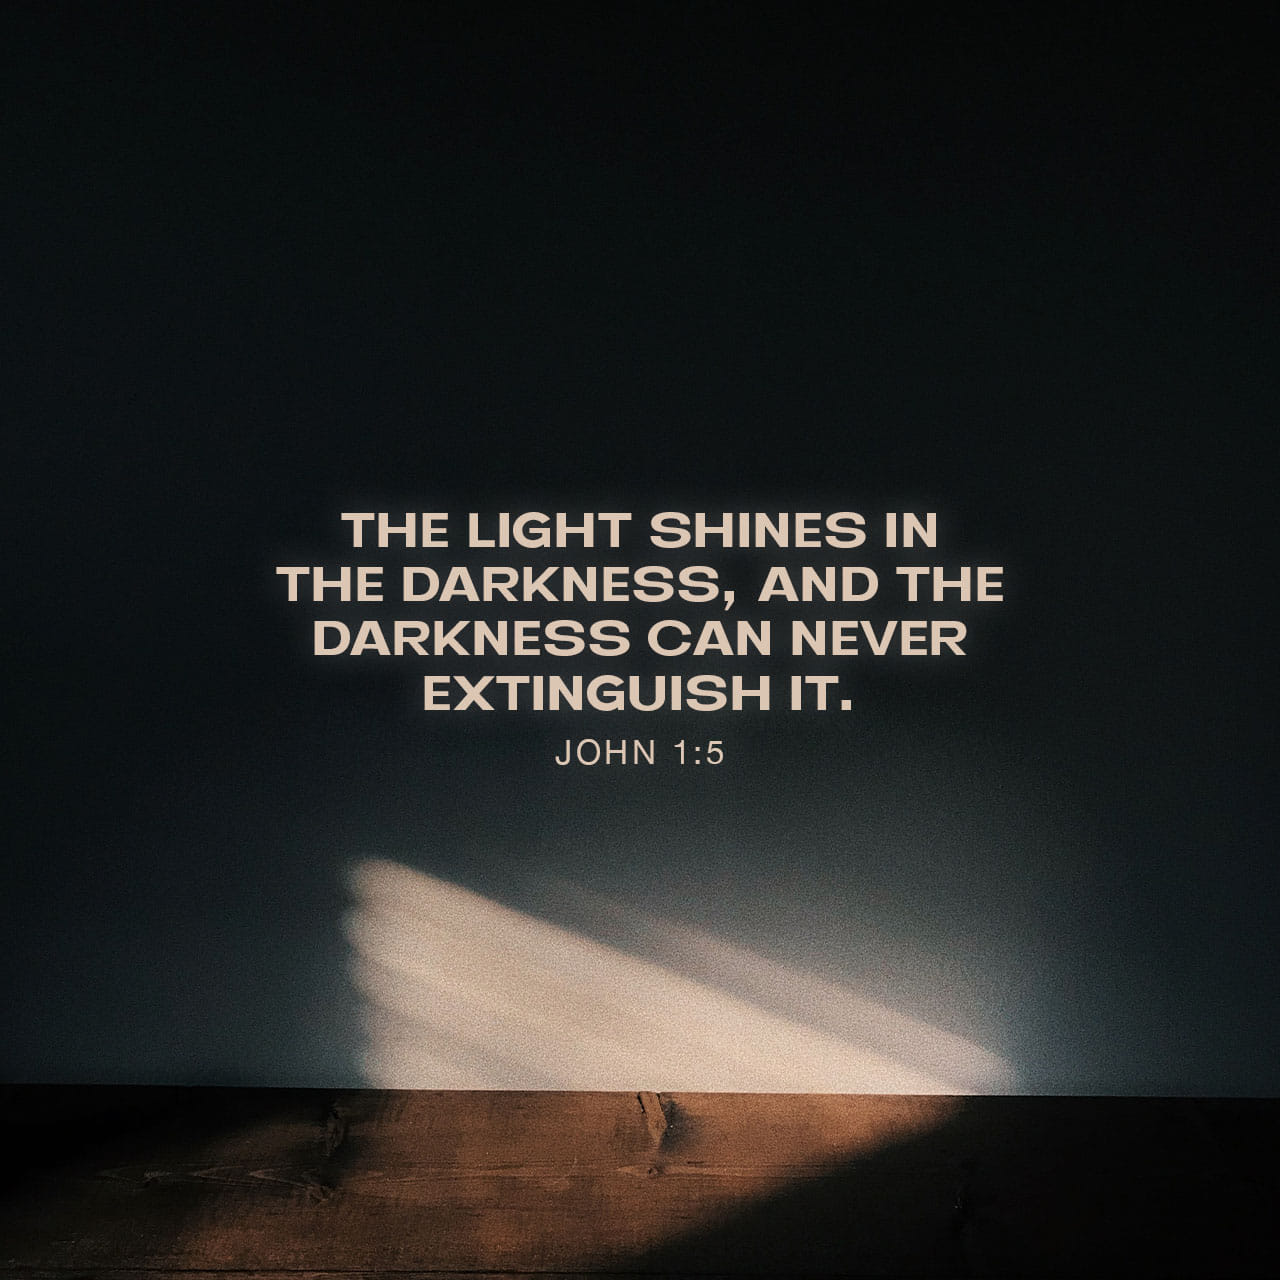 John 1 5 The Light Shines In The Darkness And The Darkness Has Not Overcome It The Light Shines In The Darkness And The Darkness Has Not Overcome It The Light Shines In